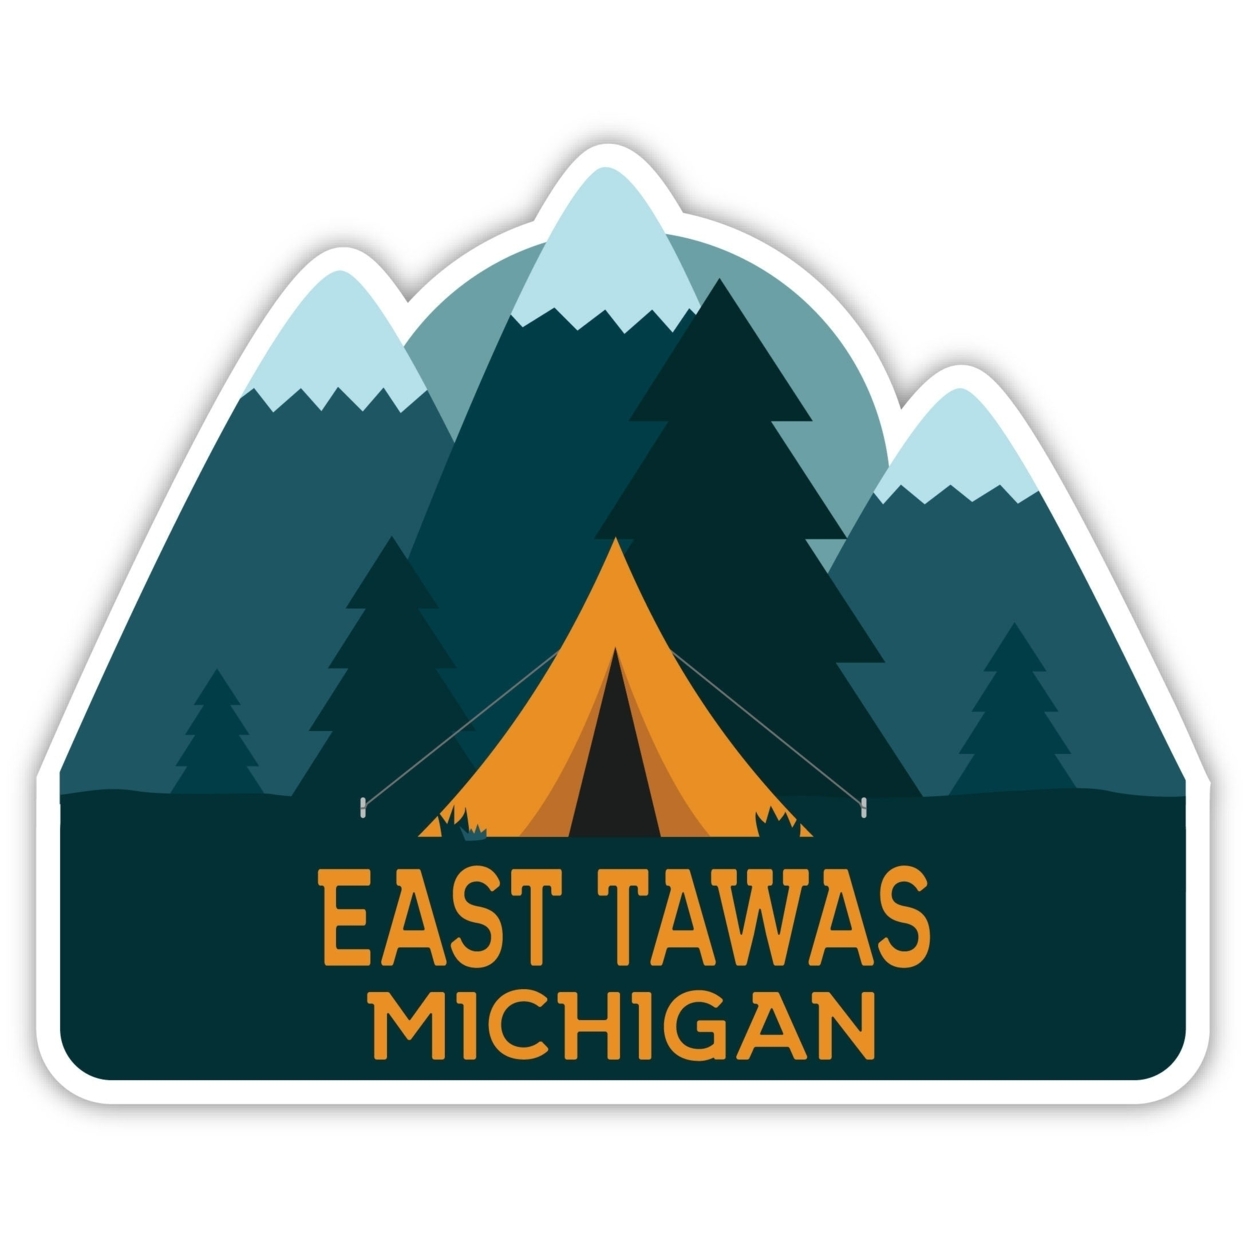 East Tawas Michigan Souvenir Decorative Stickers (Choose Theme And Size) - 4-Pack, 4-Inch, Adventures Awaits